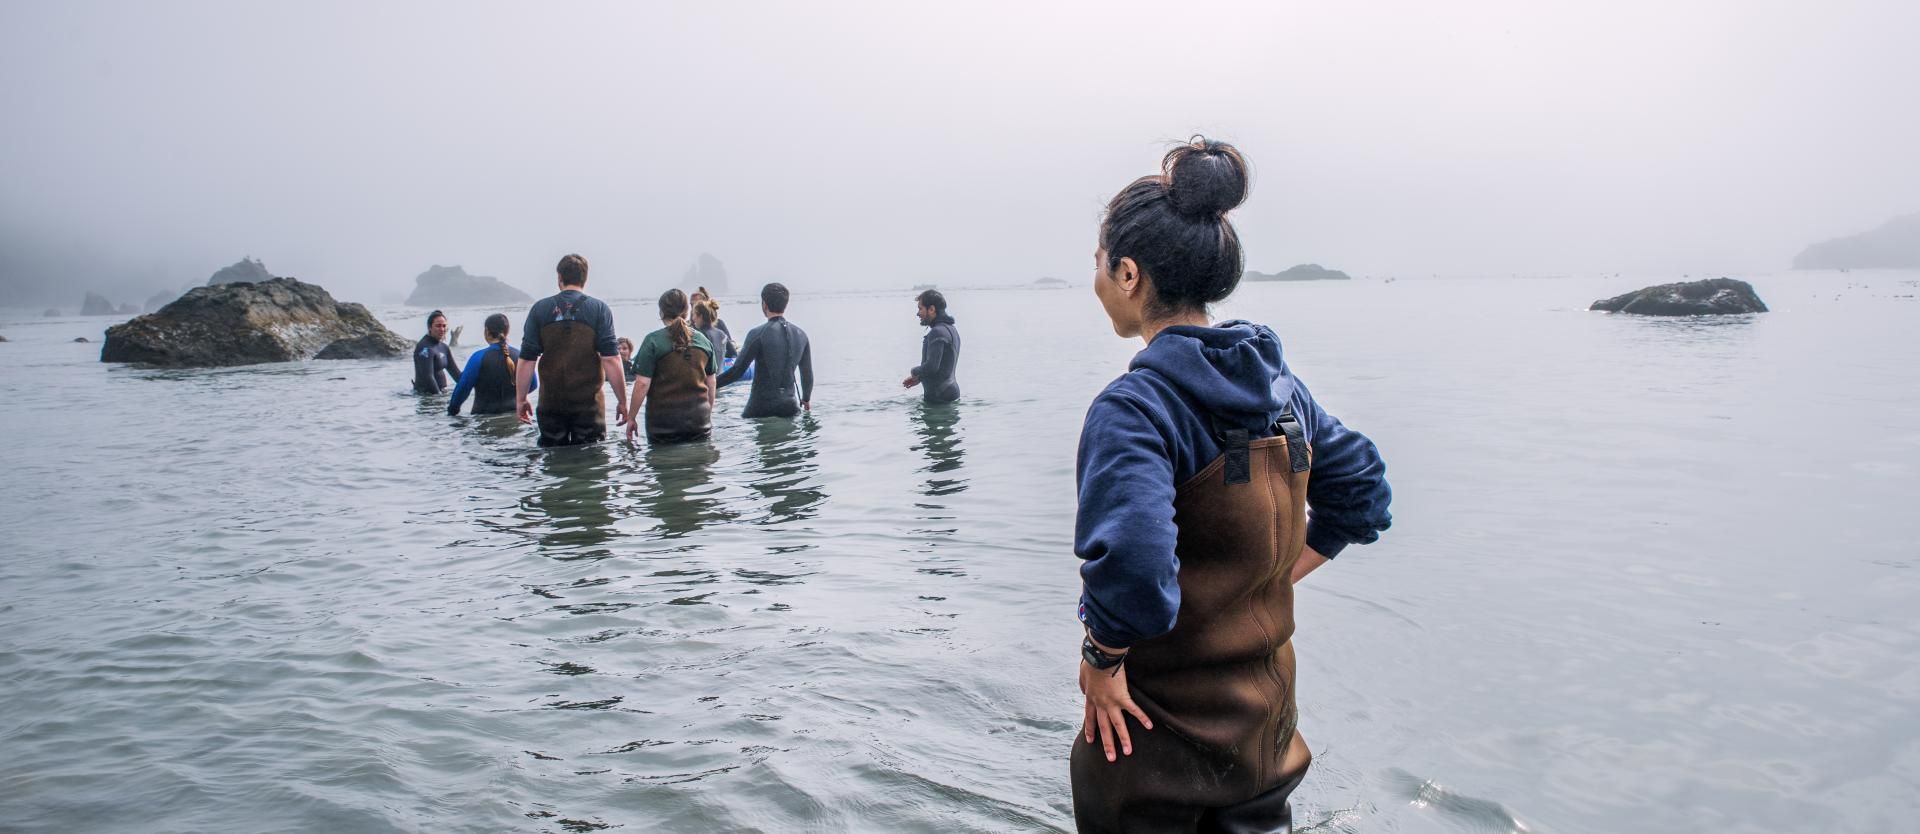 Students wading in water doing sustainability work